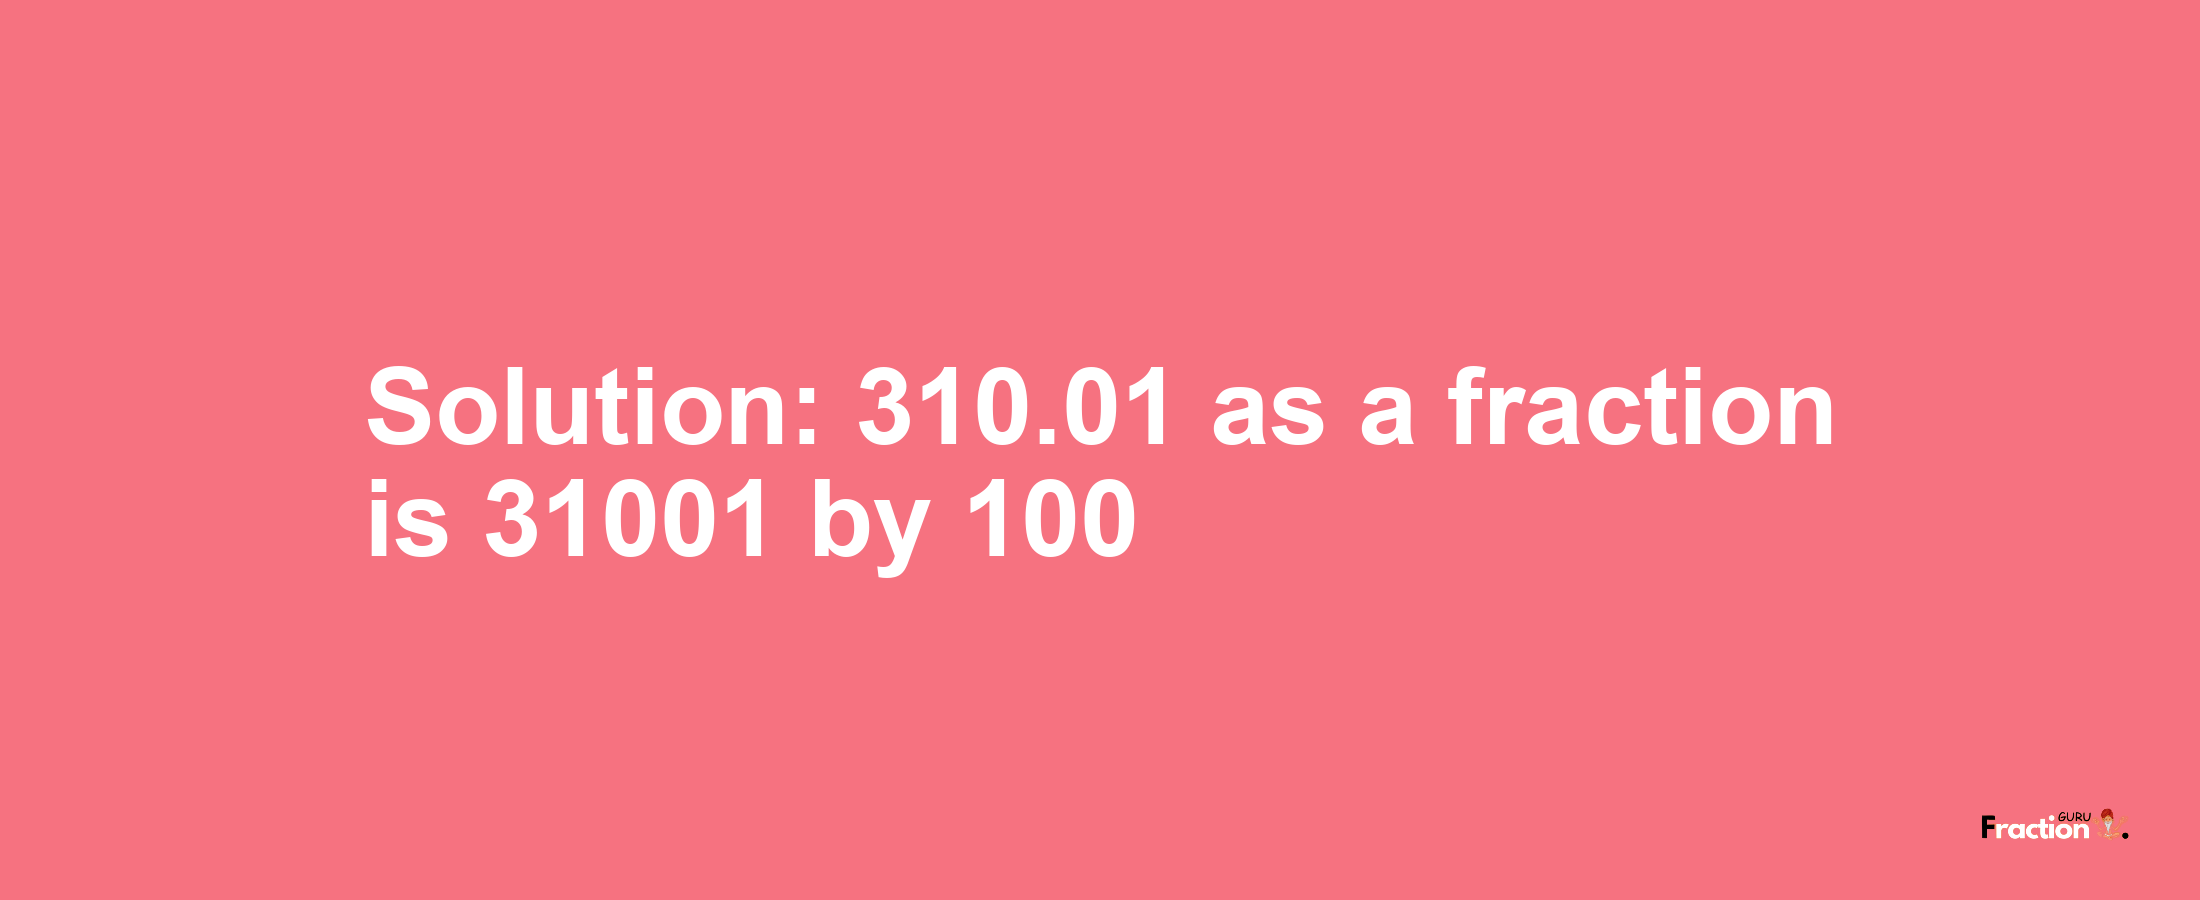 Solution:310.01 as a fraction is 31001/100